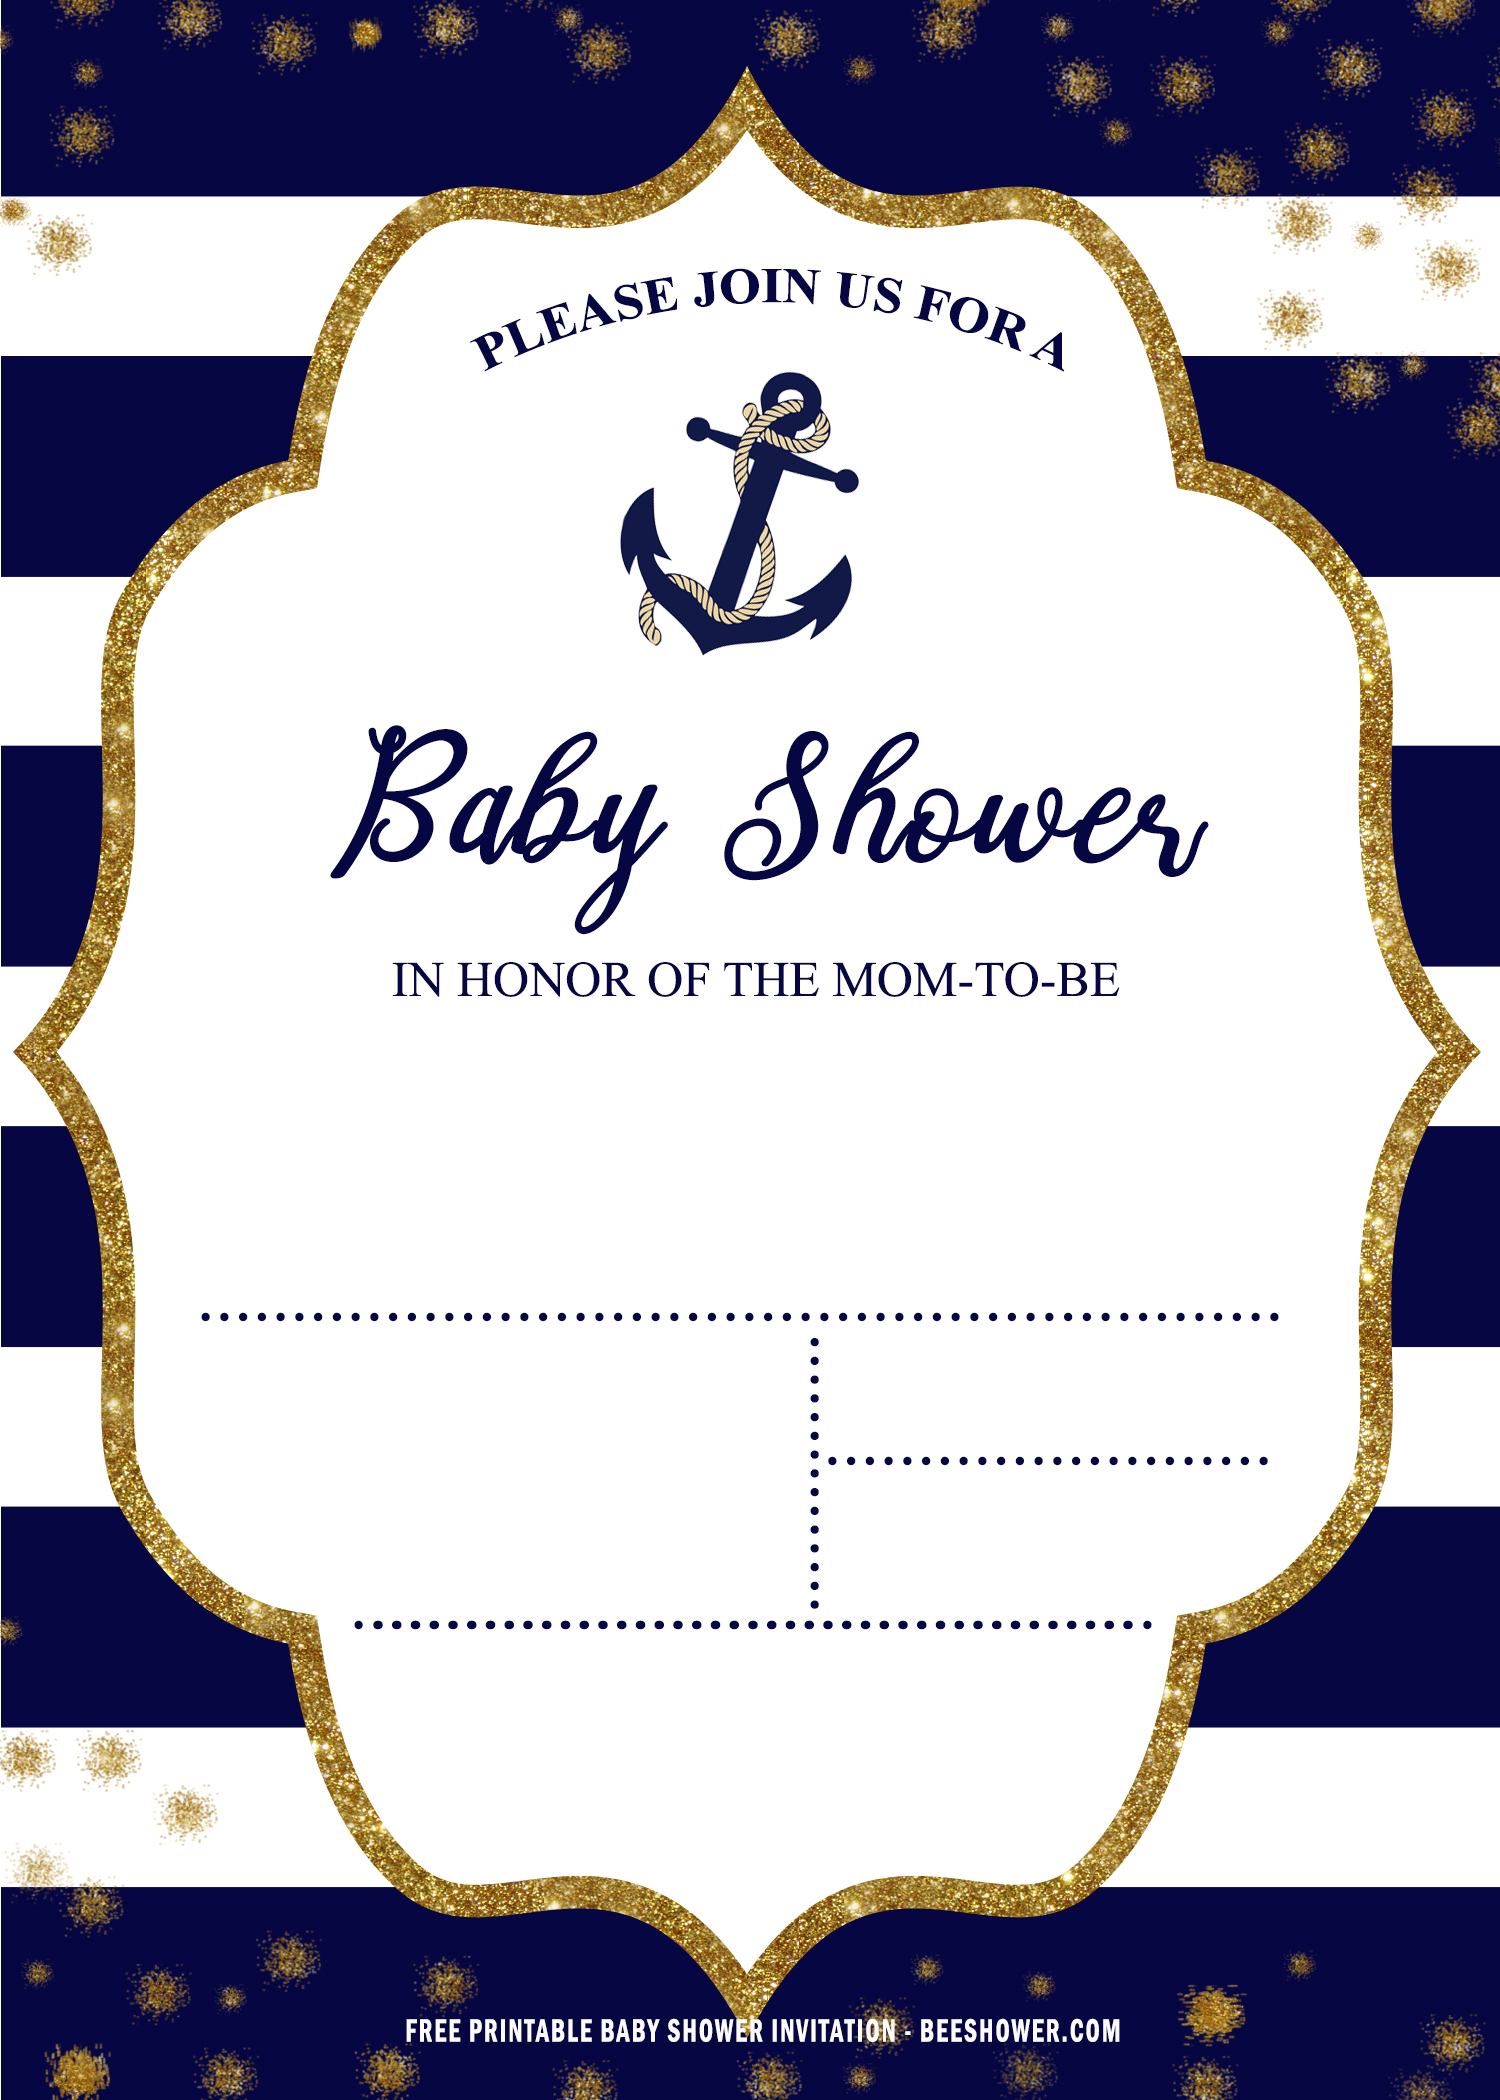 Baby Shower Word Template from www.drevio.com